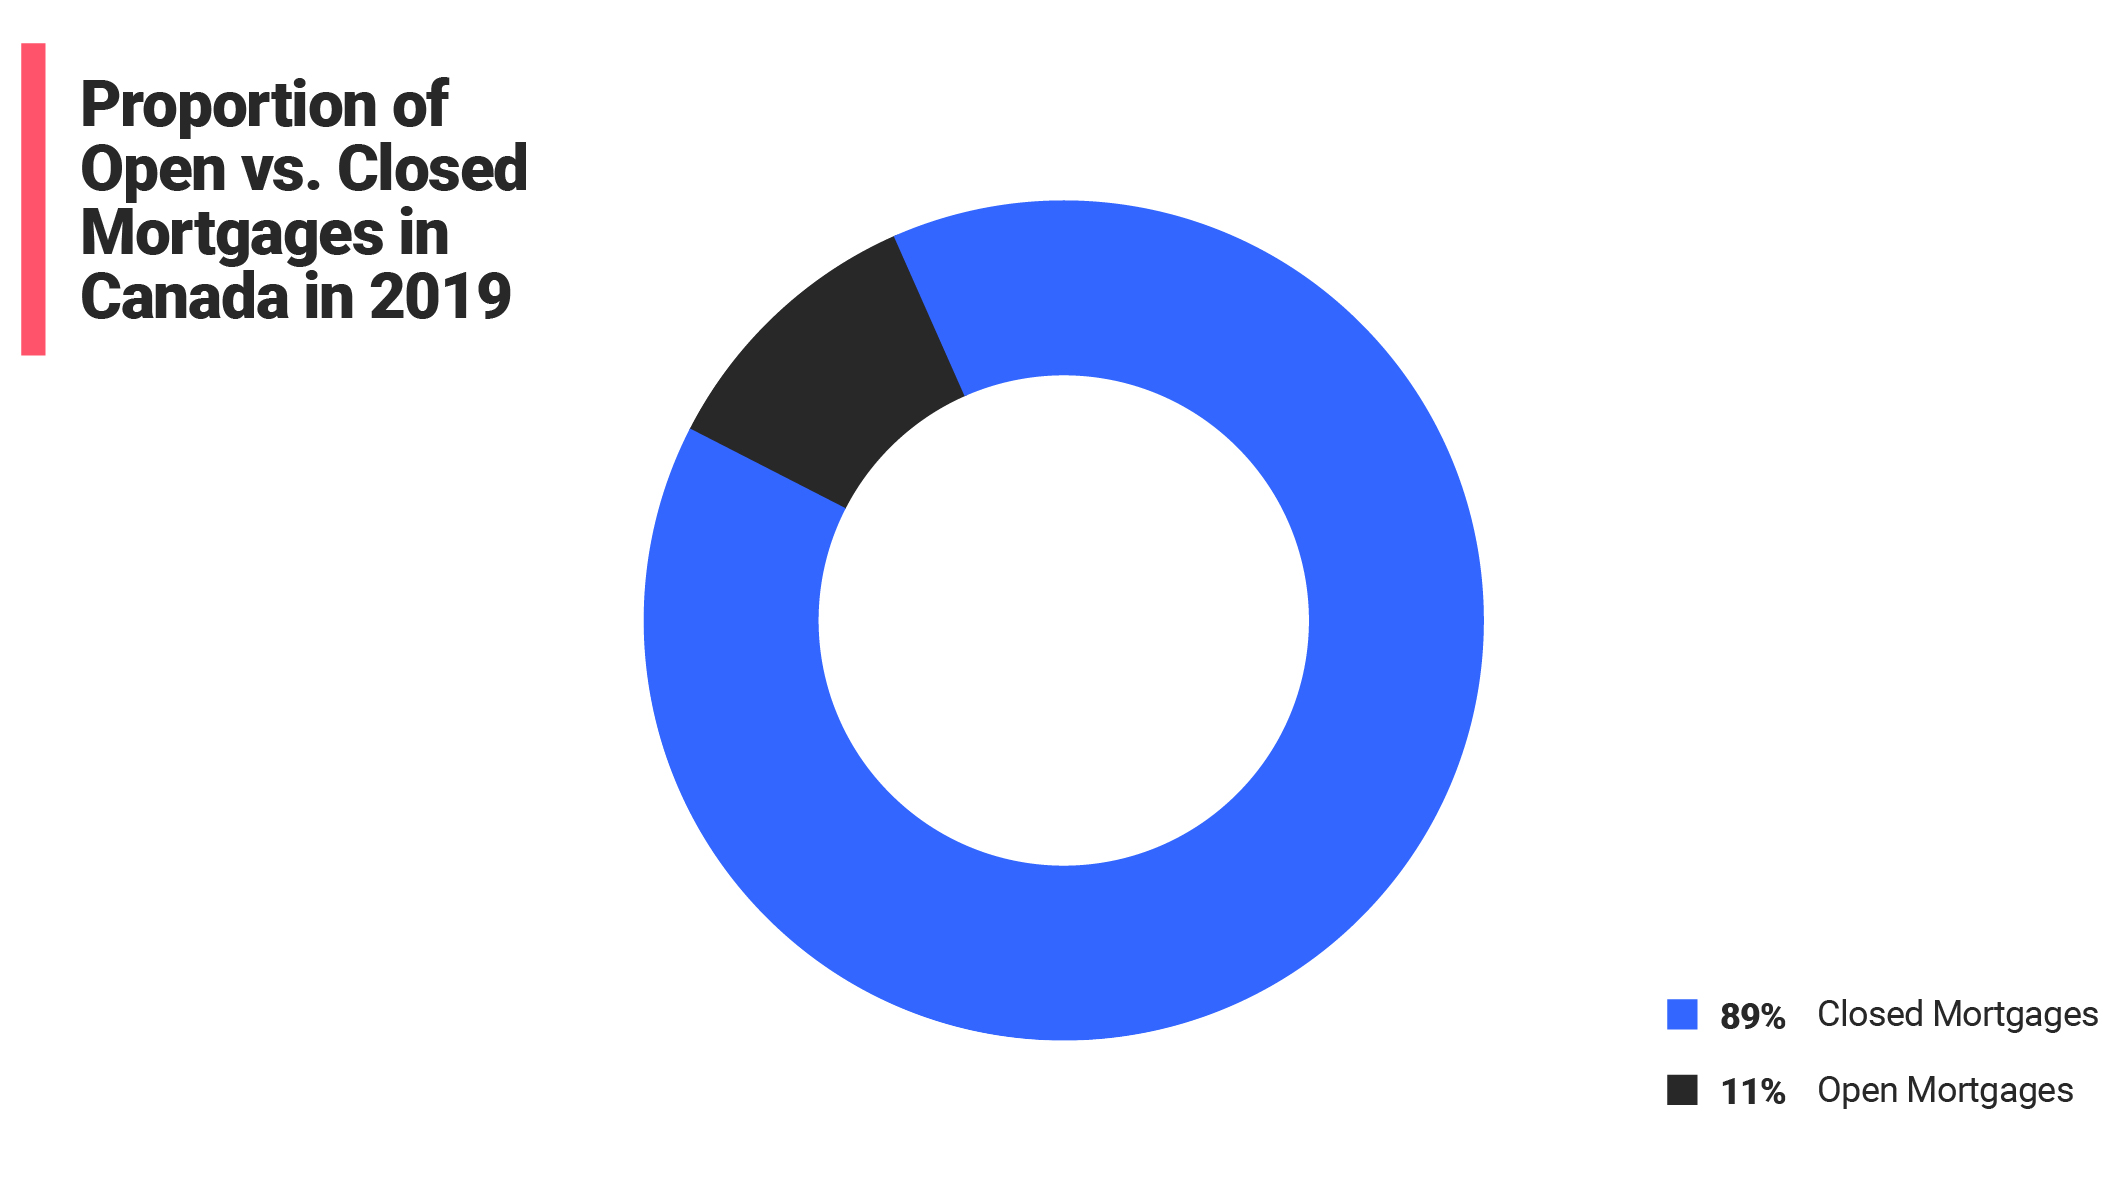 Pie Chart: 89% Closed Mortgage, and 11% Open Mortgages